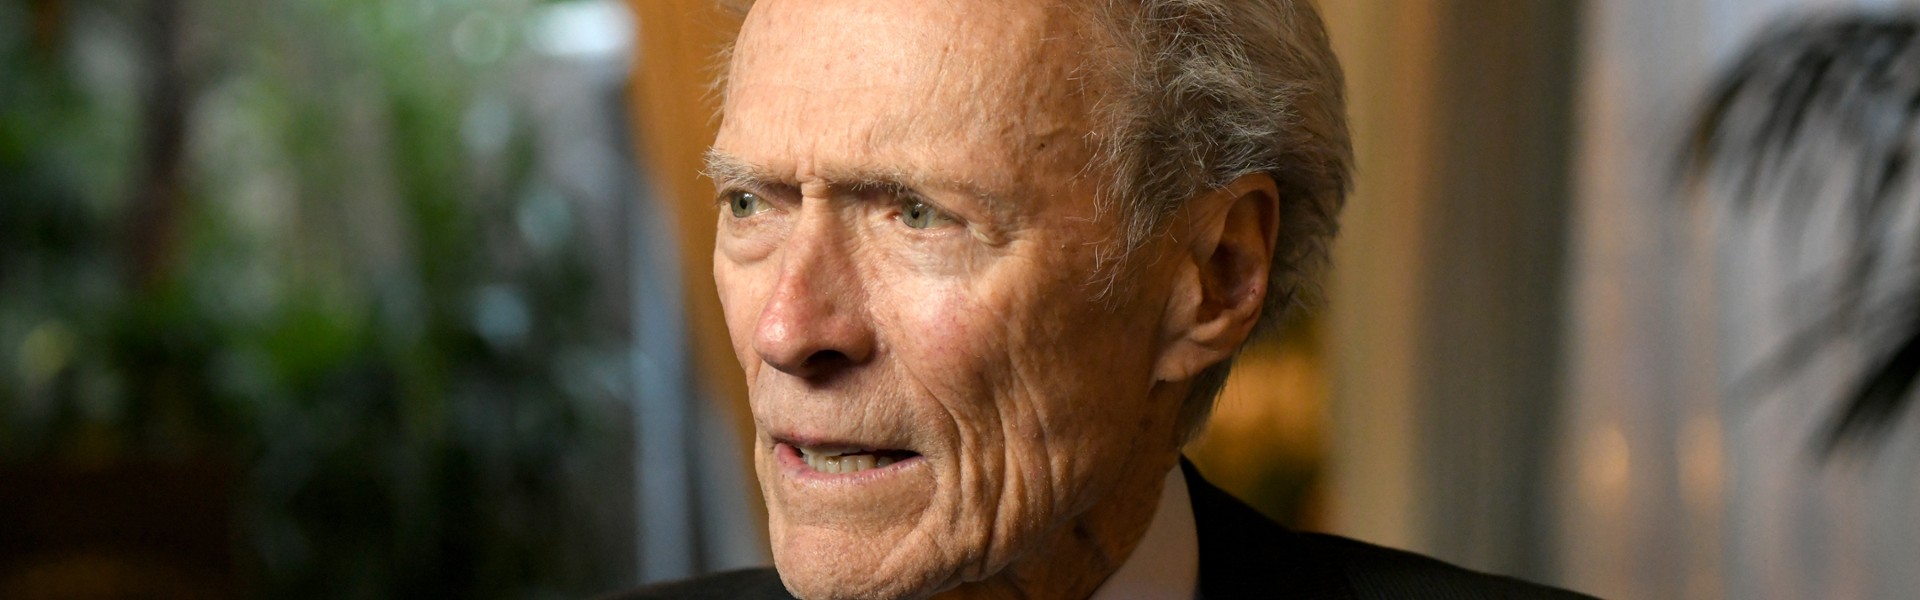 When will “Juror #2” hit the theaters? Clint Eastwood provides an approximate release date